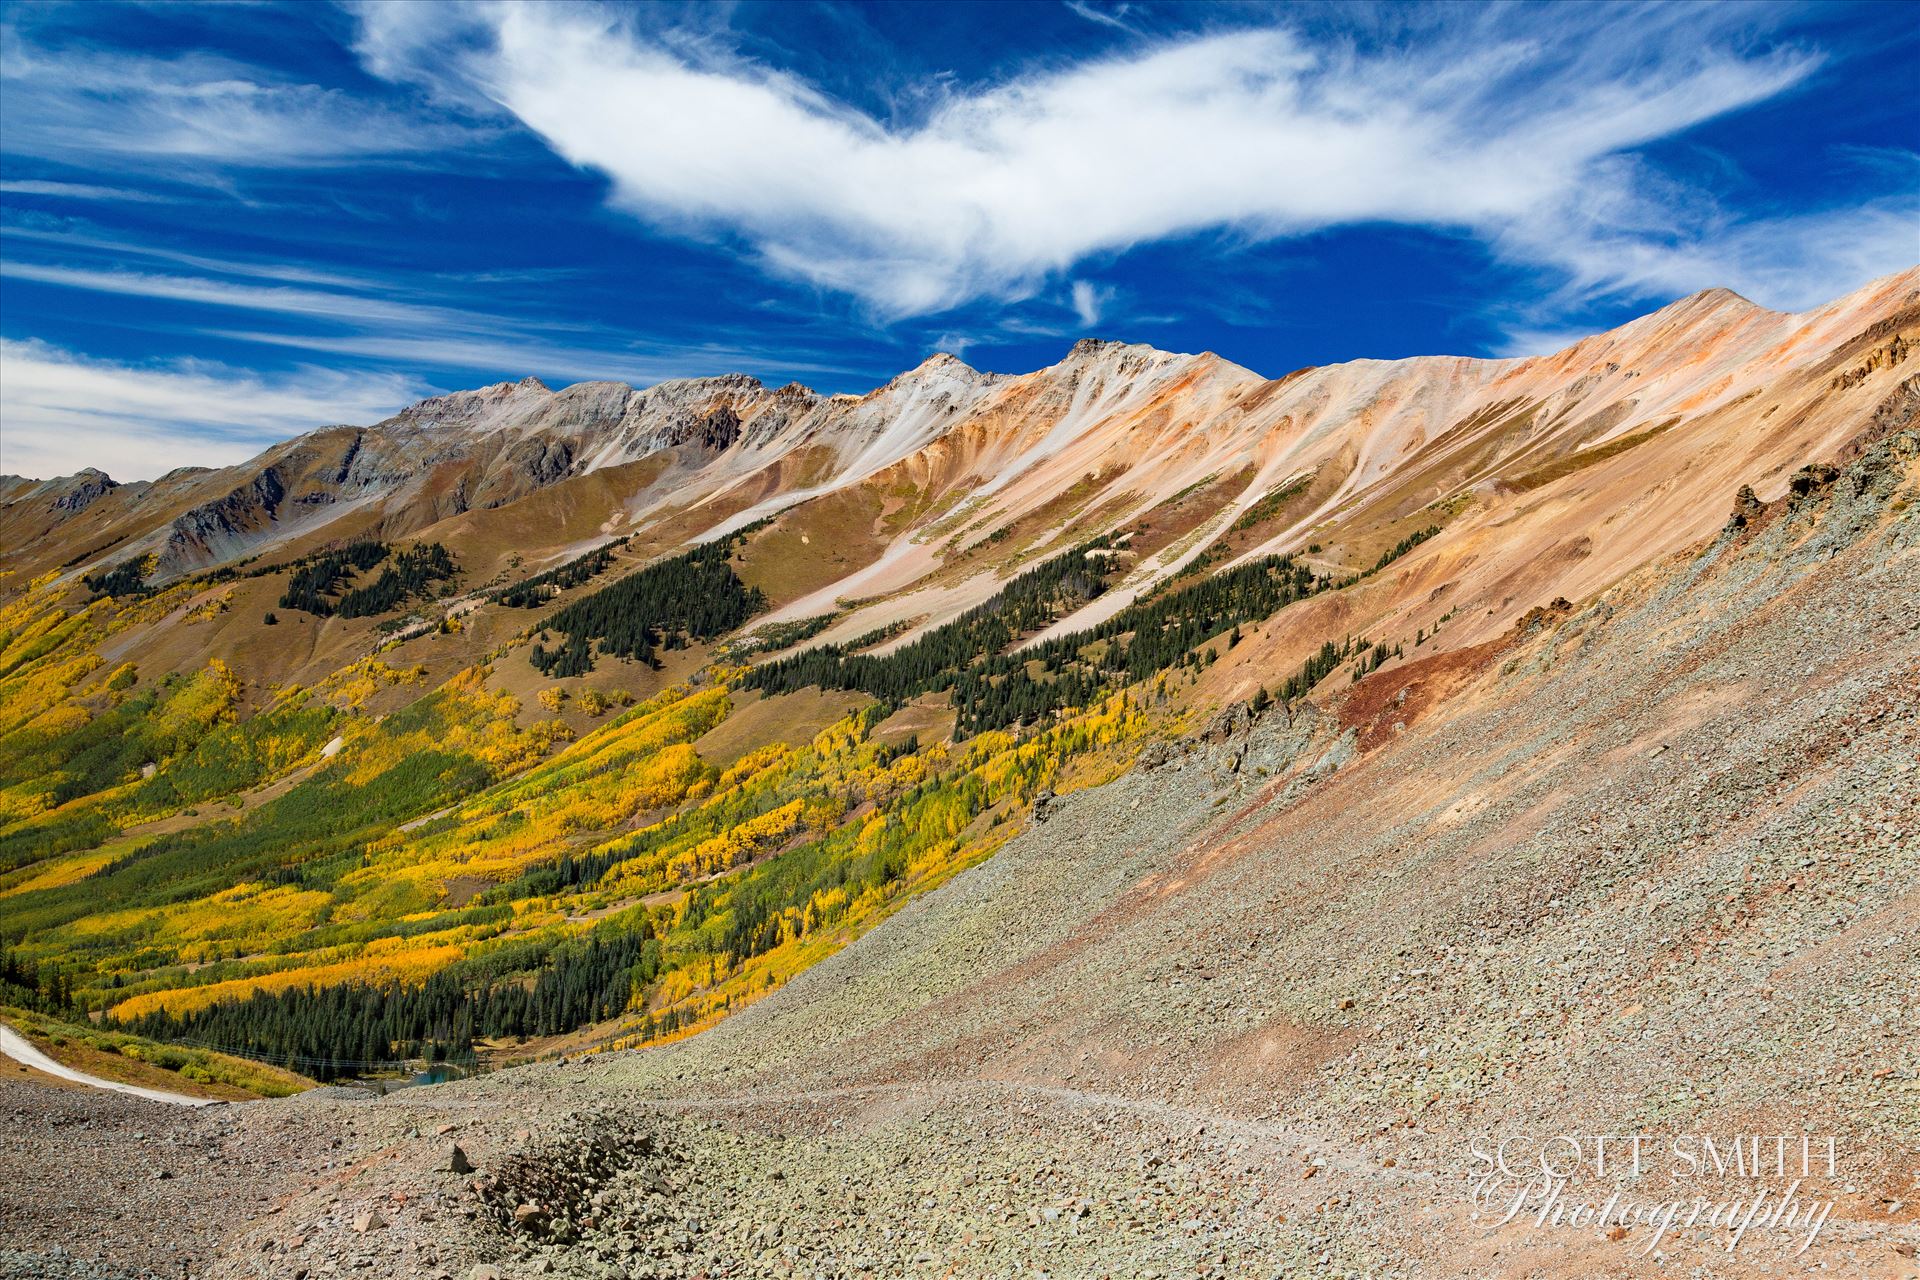 Ophir Pass 1 - Just west of the Ophir Pass summit, between Ouray and Silverton Colorado in the fall. by Scott Smith Photos